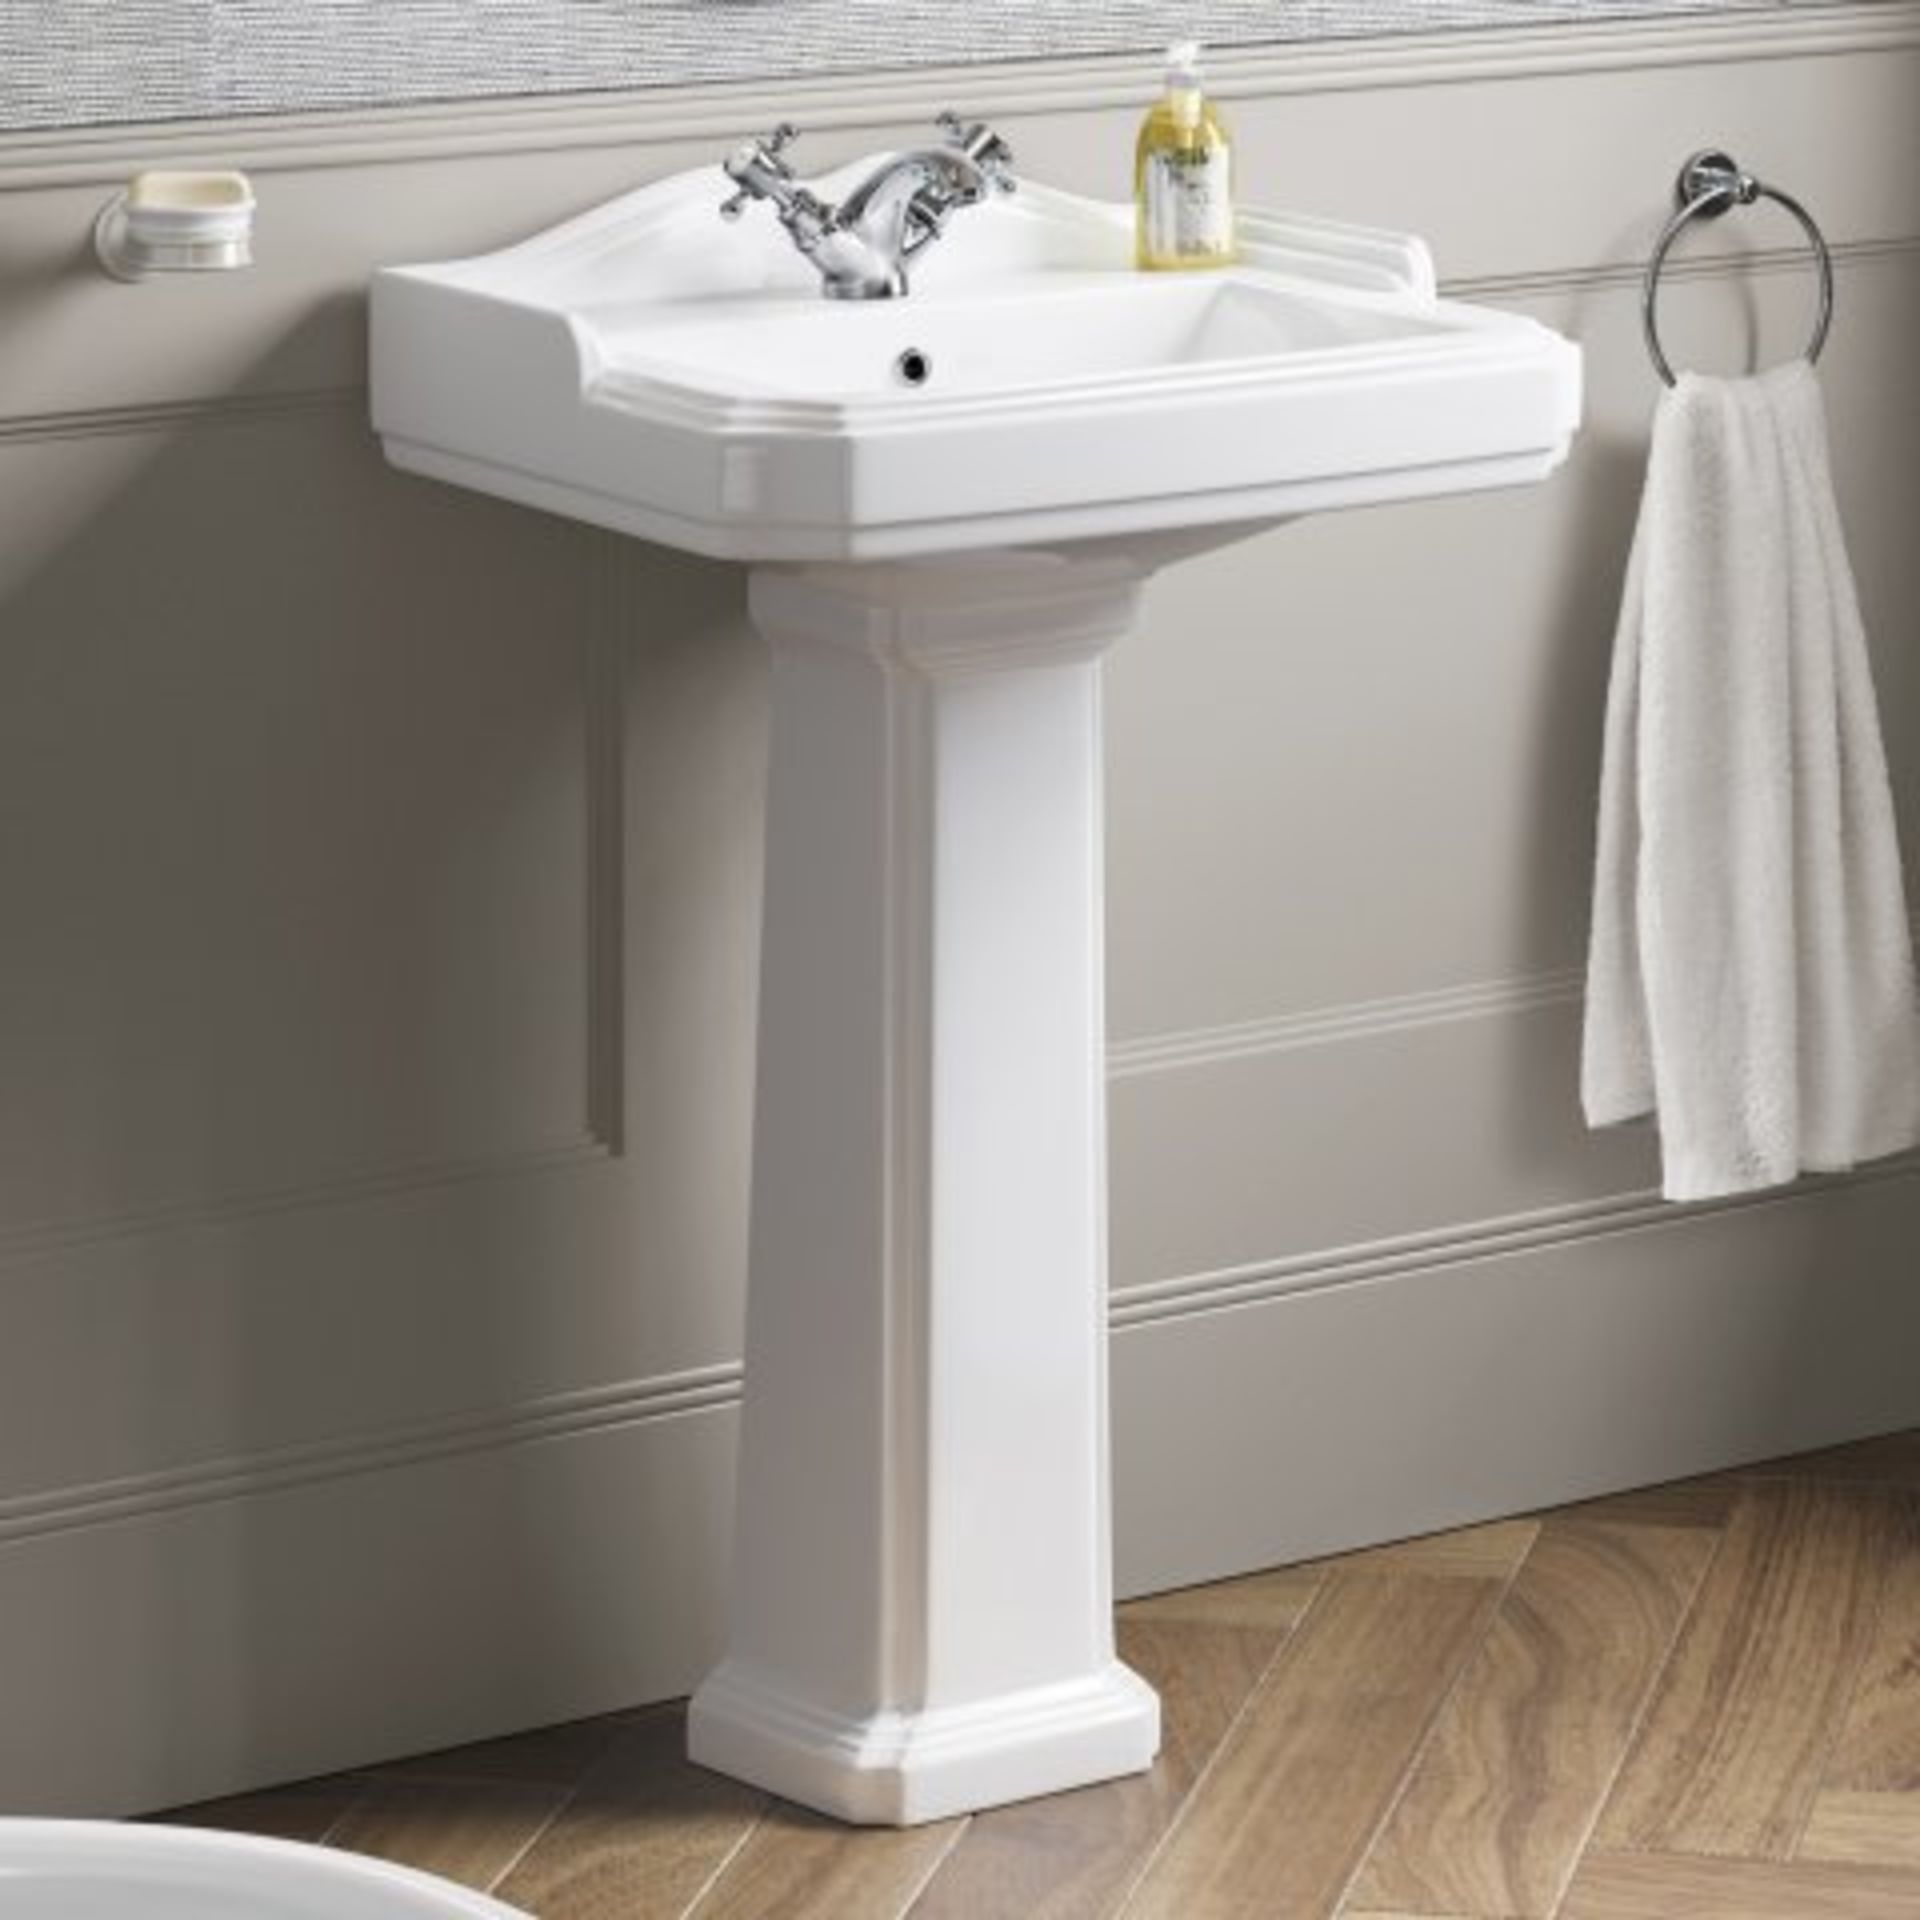 Pallet To Contain 10 X Victoria Basin &Amp; Pedestal - Single Tap Hole. Rrp £249.99 Each, Giving